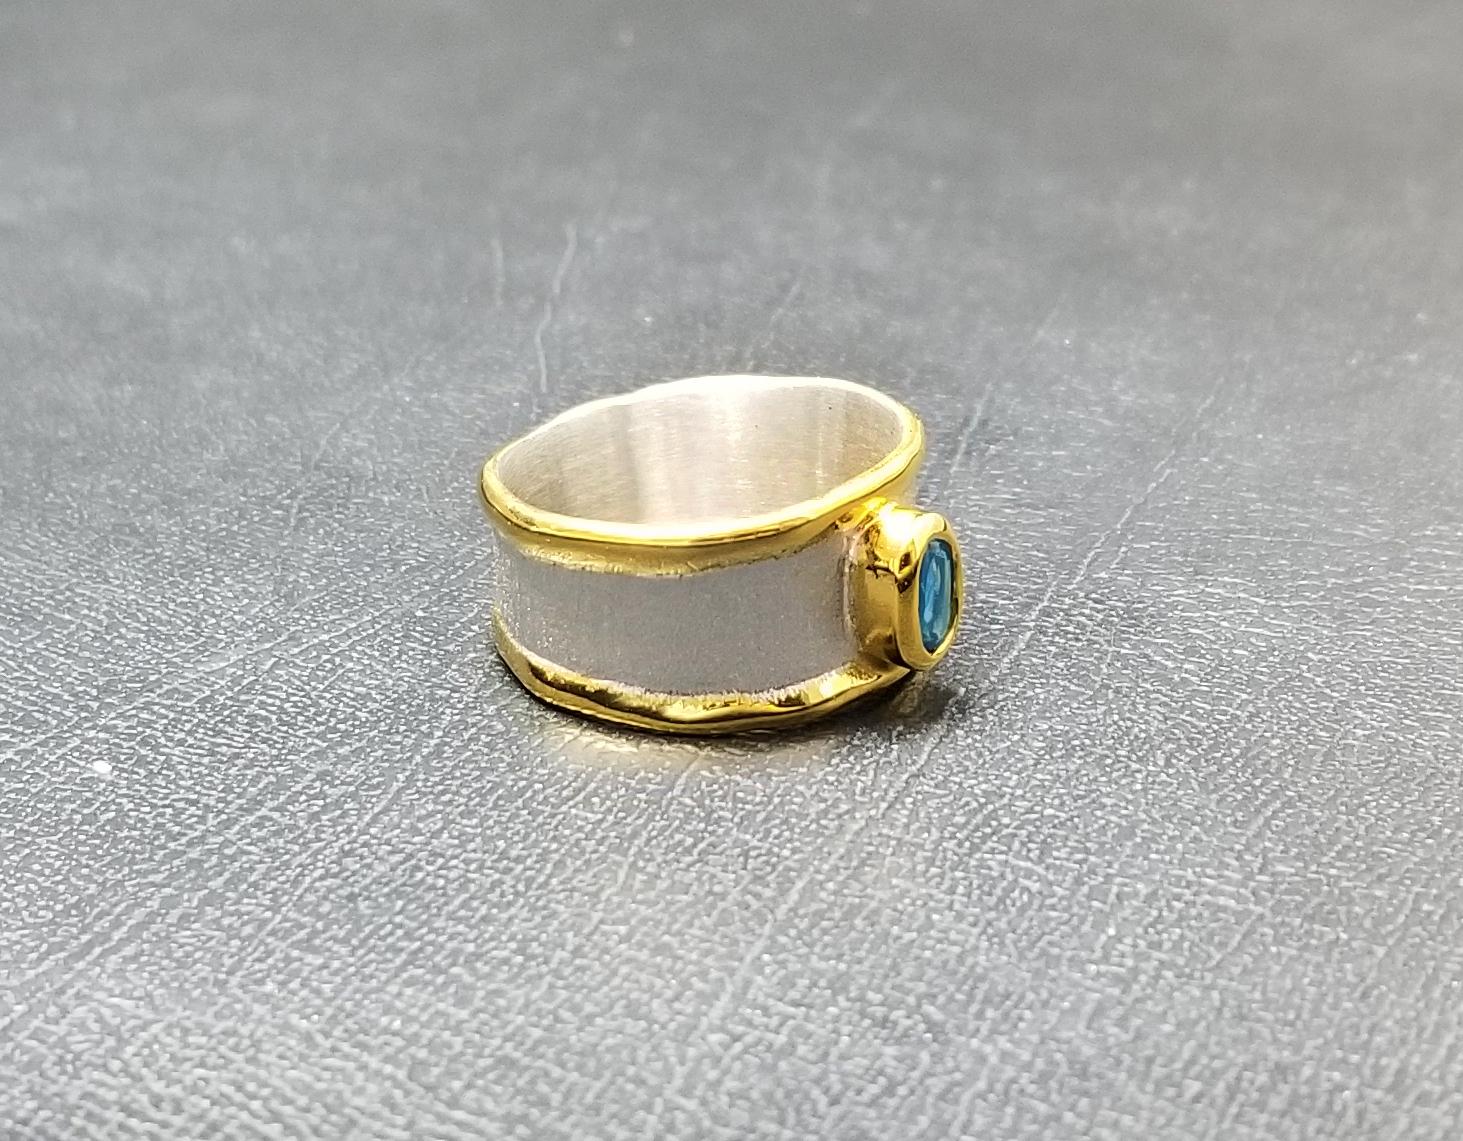 Men's and women's Yianni Creations Midas Collection fully handmade artisan band ring made from Fine silver plated with platinum and decorated with a thick overlay of 24 Karat yellow gold. This band features 0.57 Carat oval-shape London blue topaz.